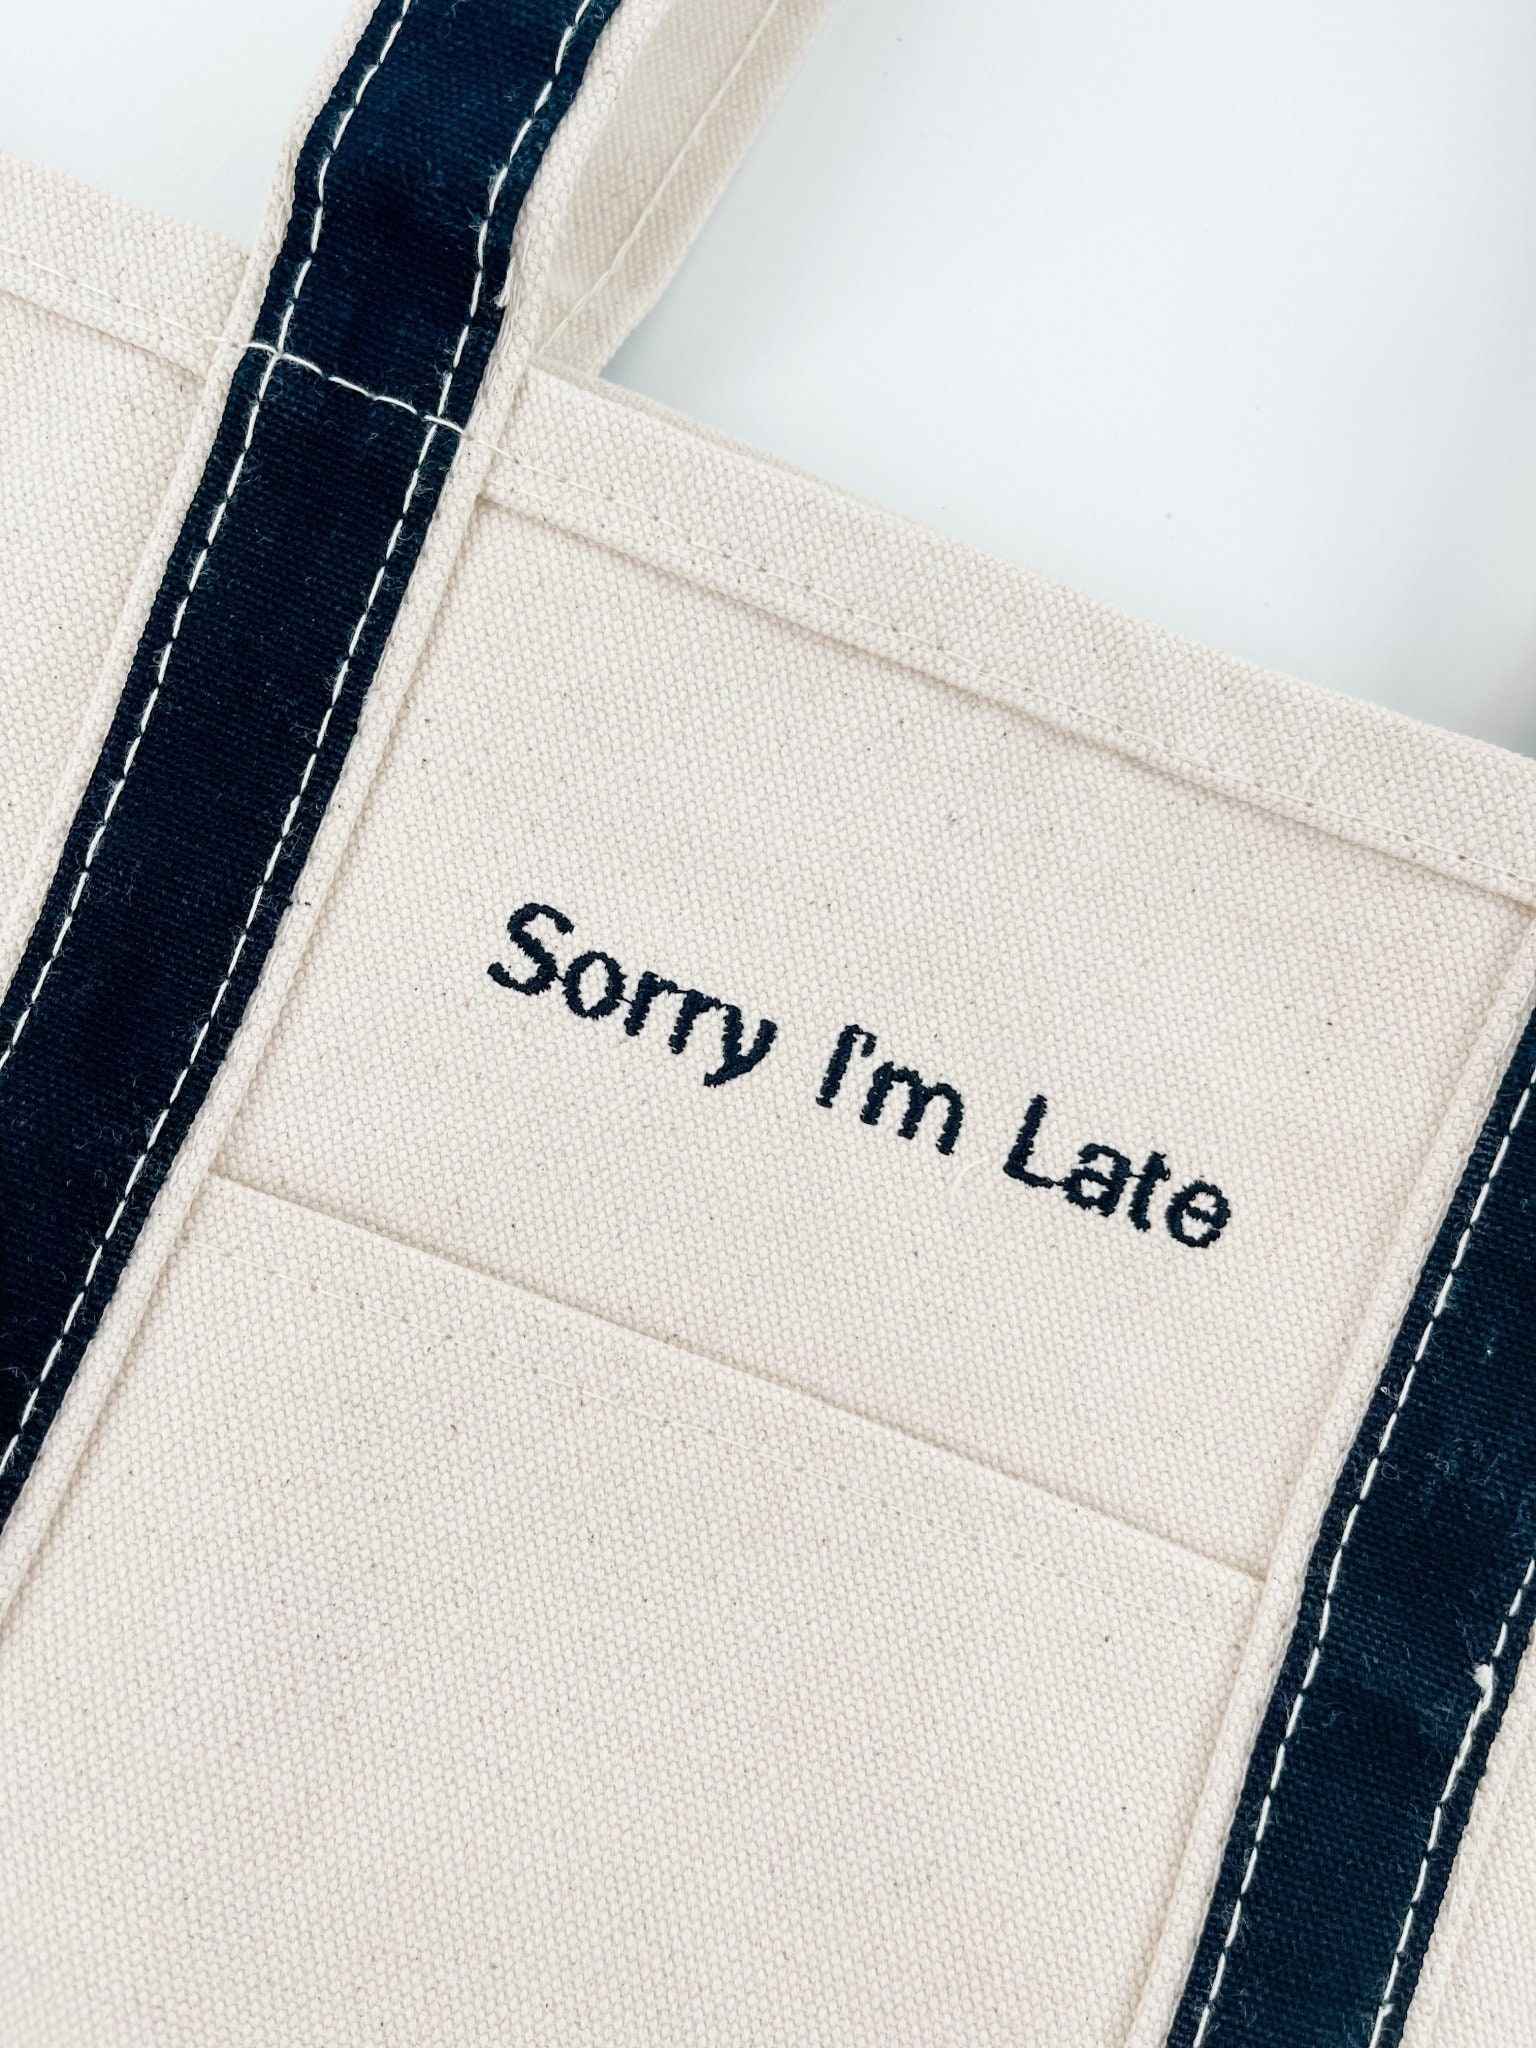 Embroidered Custom Canvas Tote // the Ironic Canvas Tote 